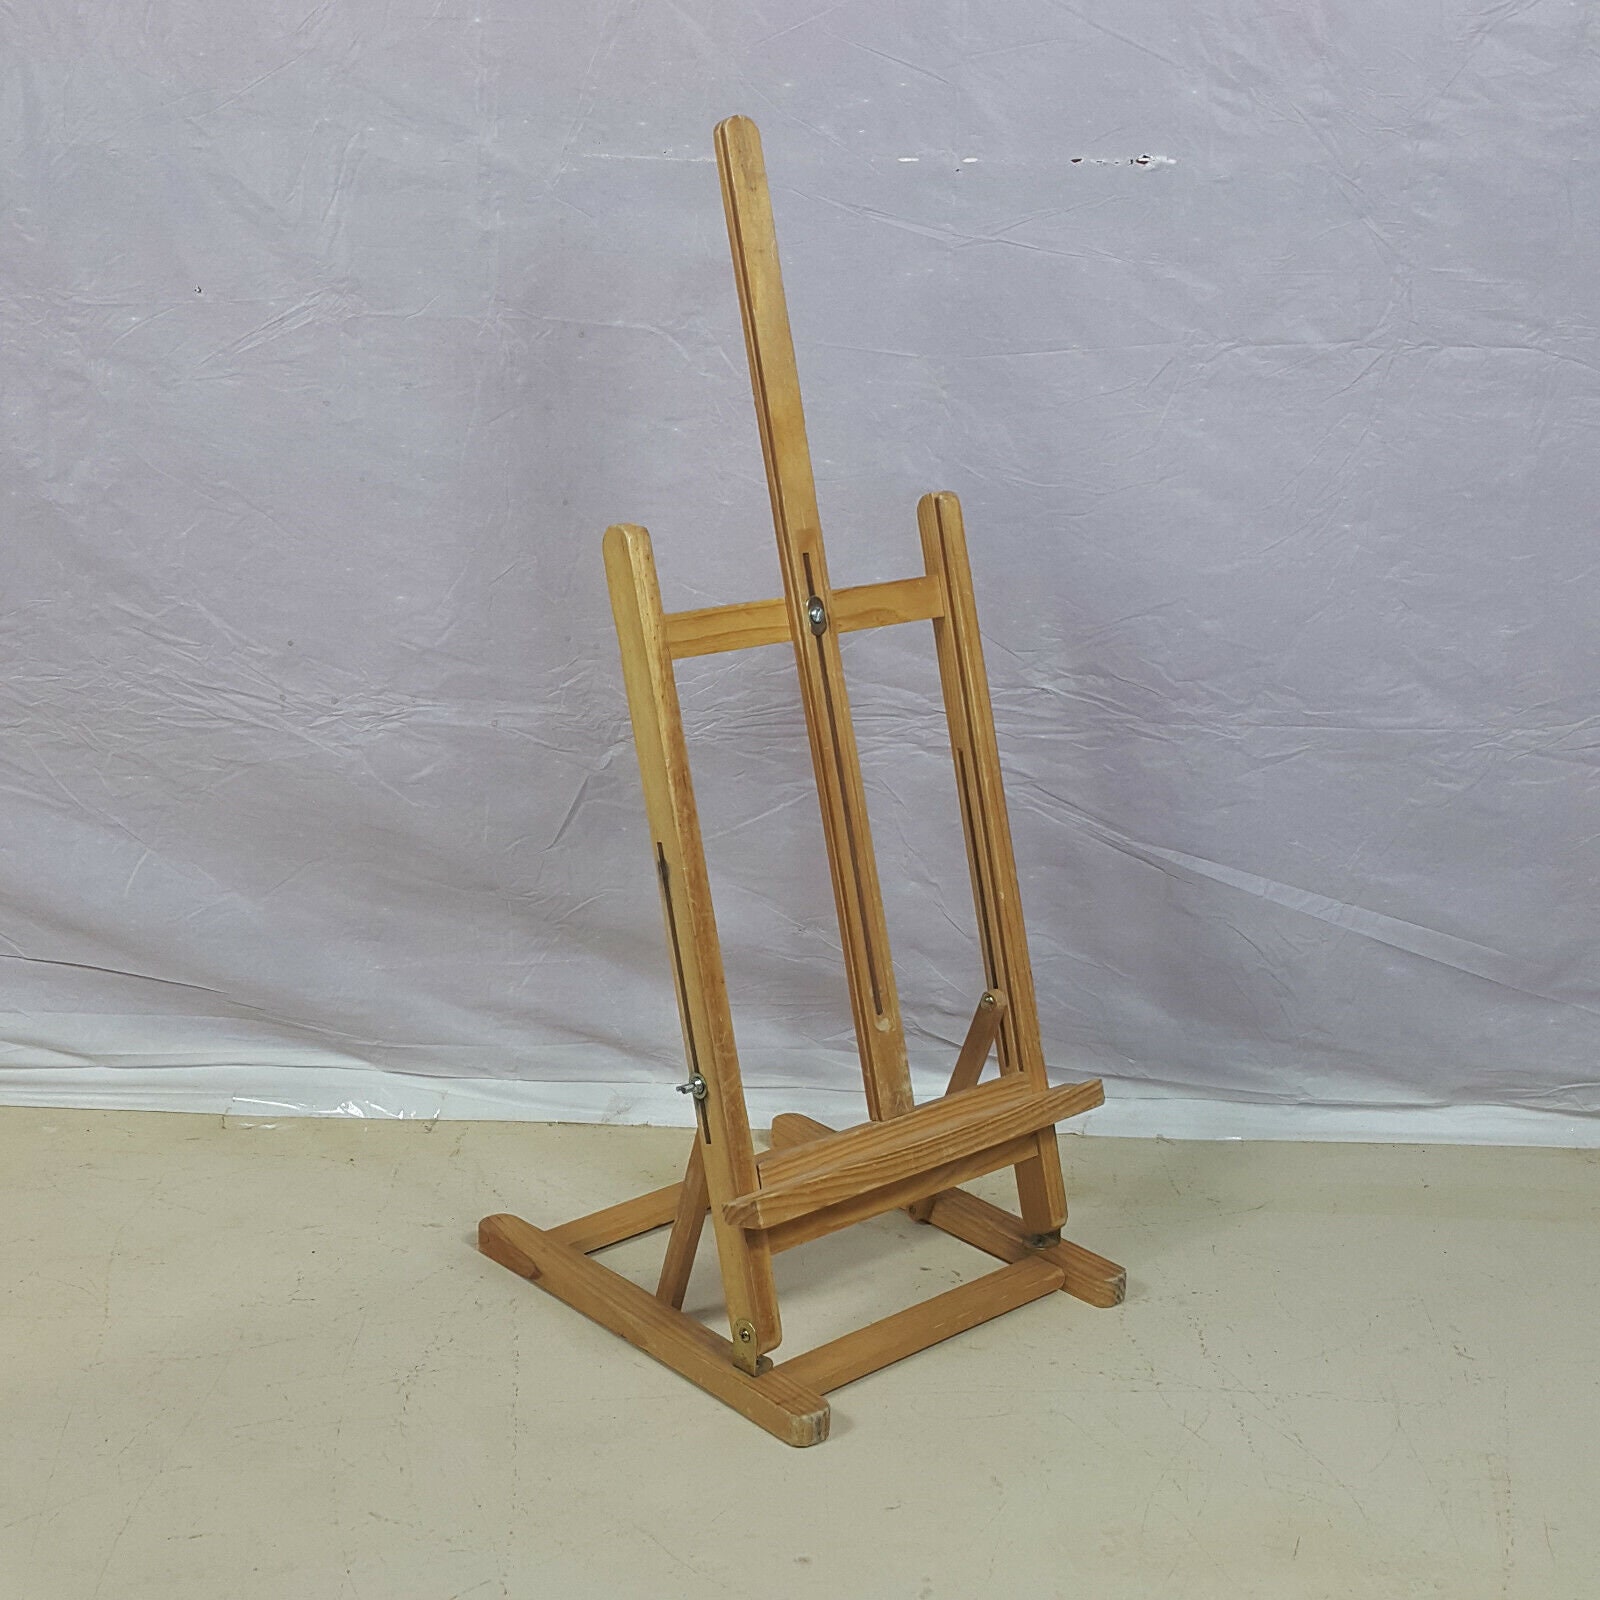 Mini Easel Stand. Mini Wooden Artist Easel. Mini Wood Display Easel for  Instax Photos. Stand for Photos. Wood Photo Holder. 